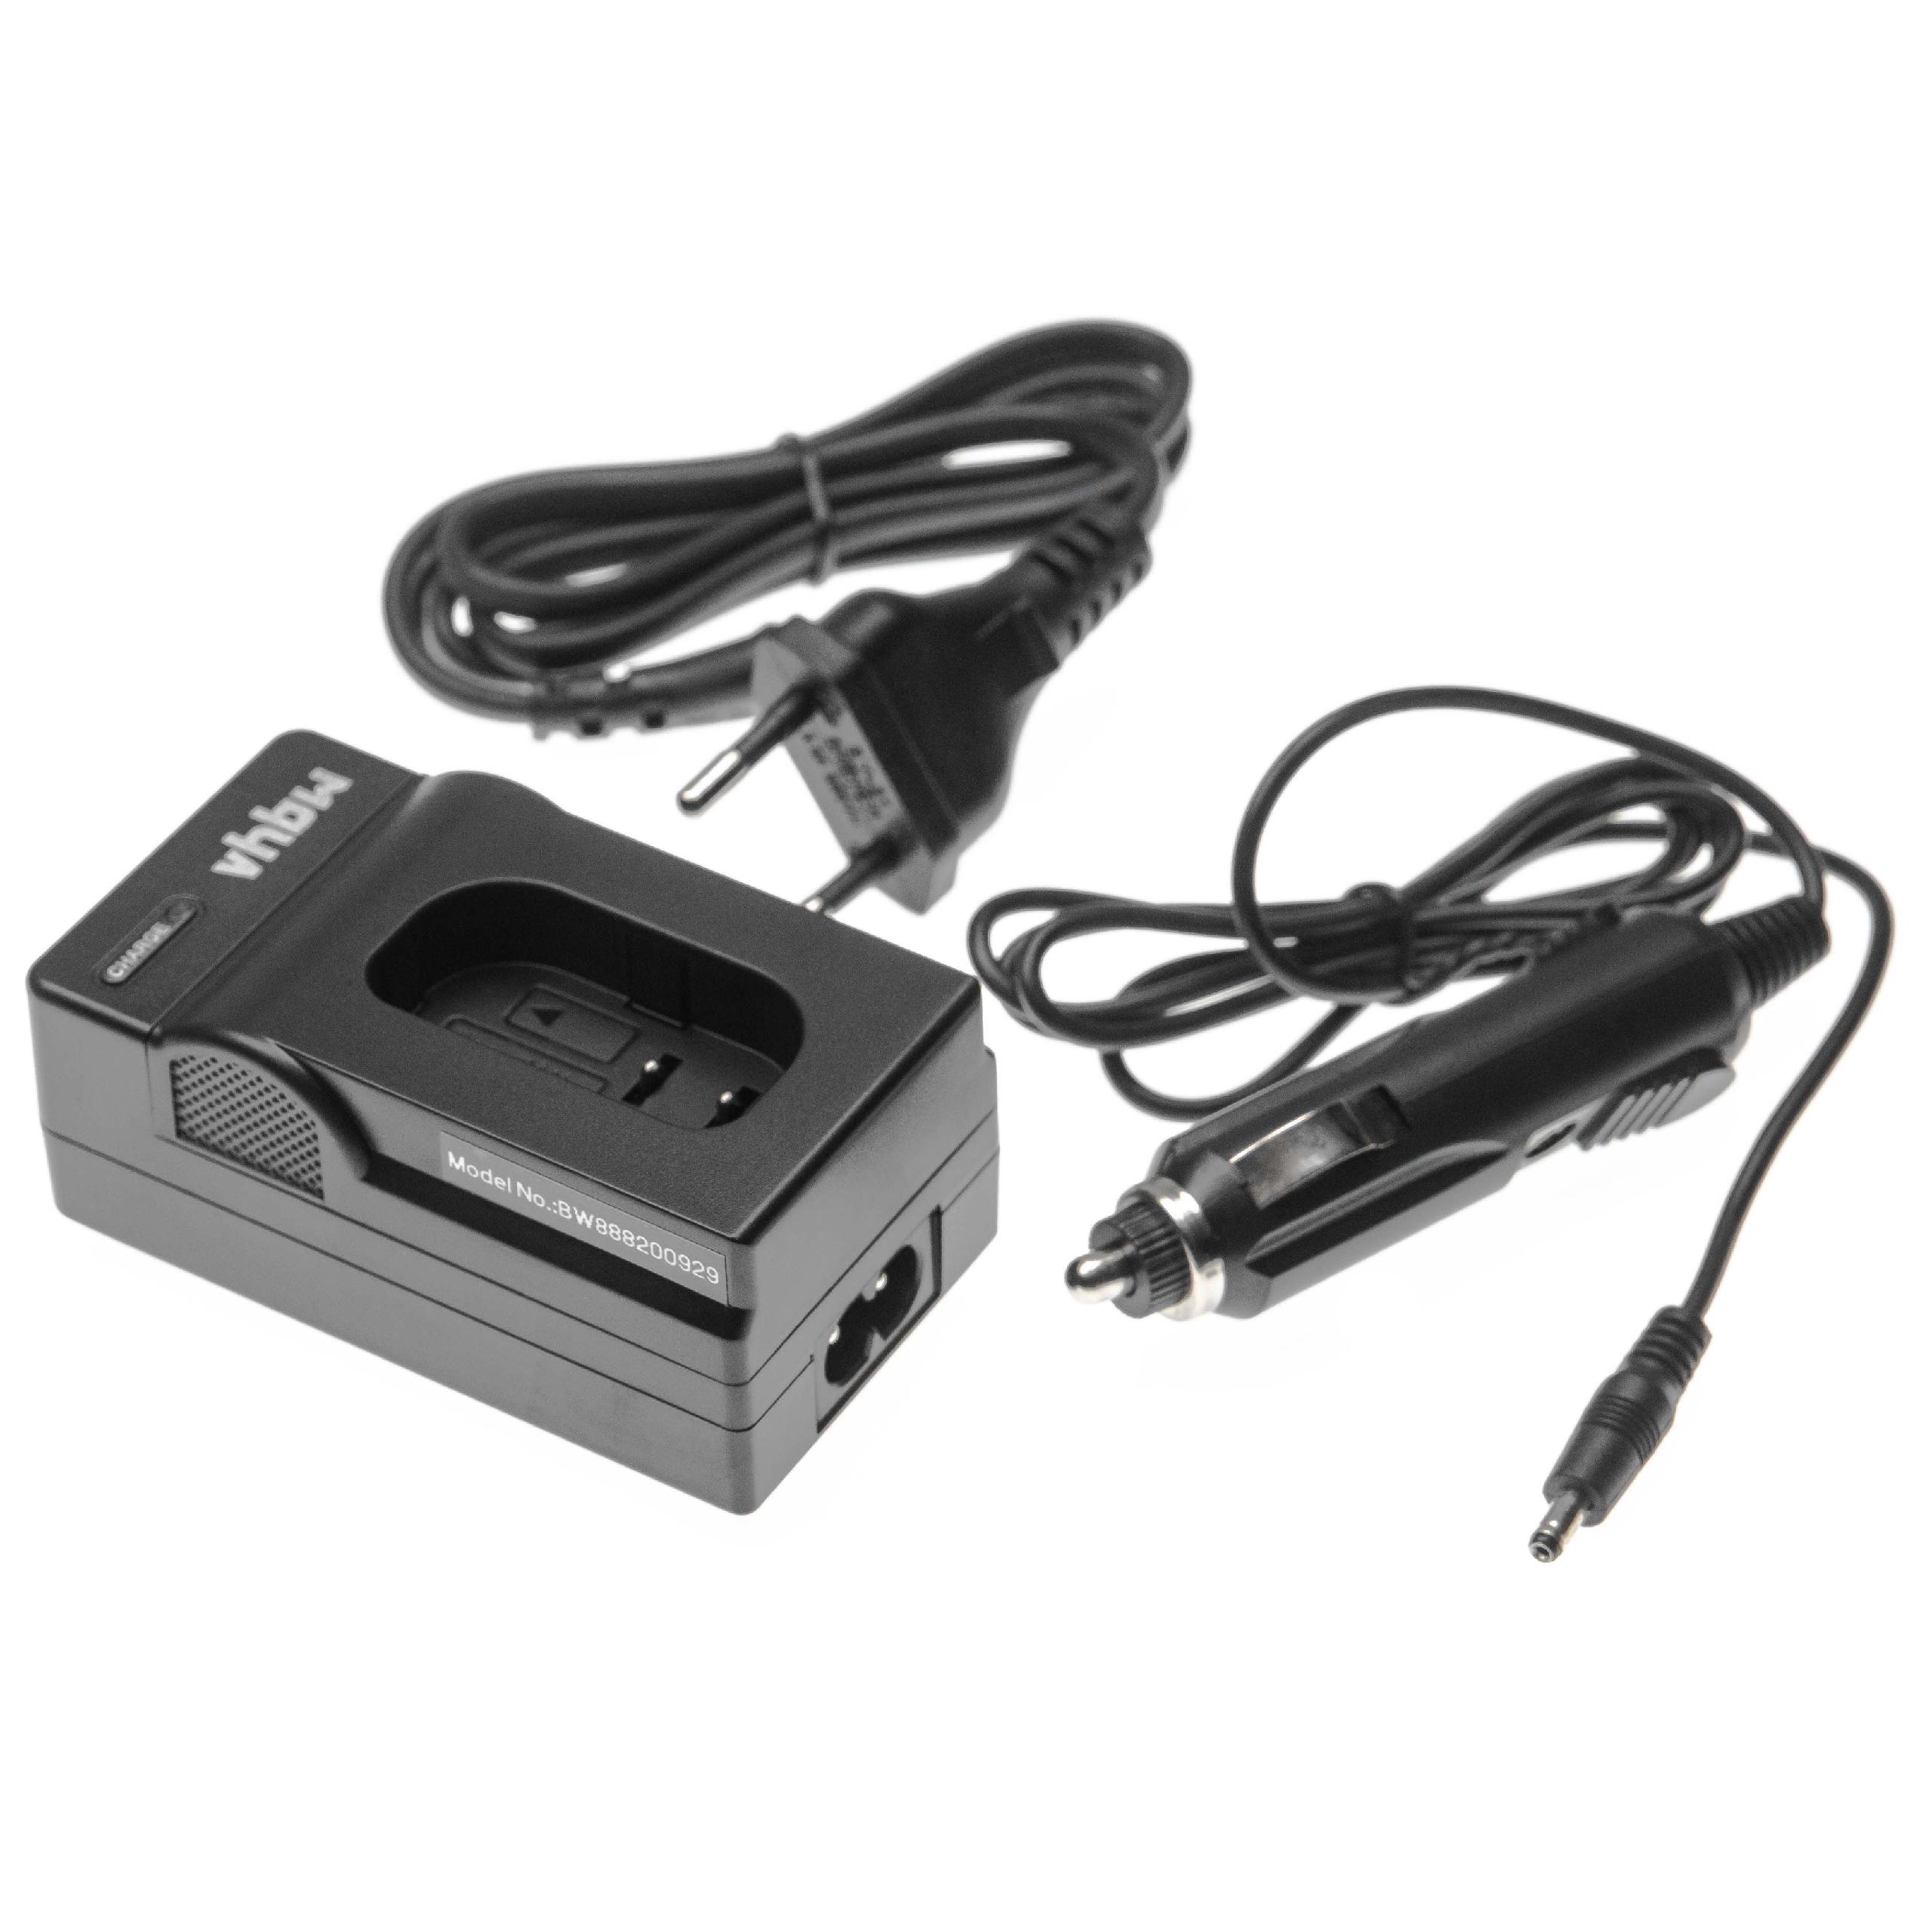 Battery Charger suitable for Lumix DC-S1 Camera etc. - 0.6 A, 8.4 V